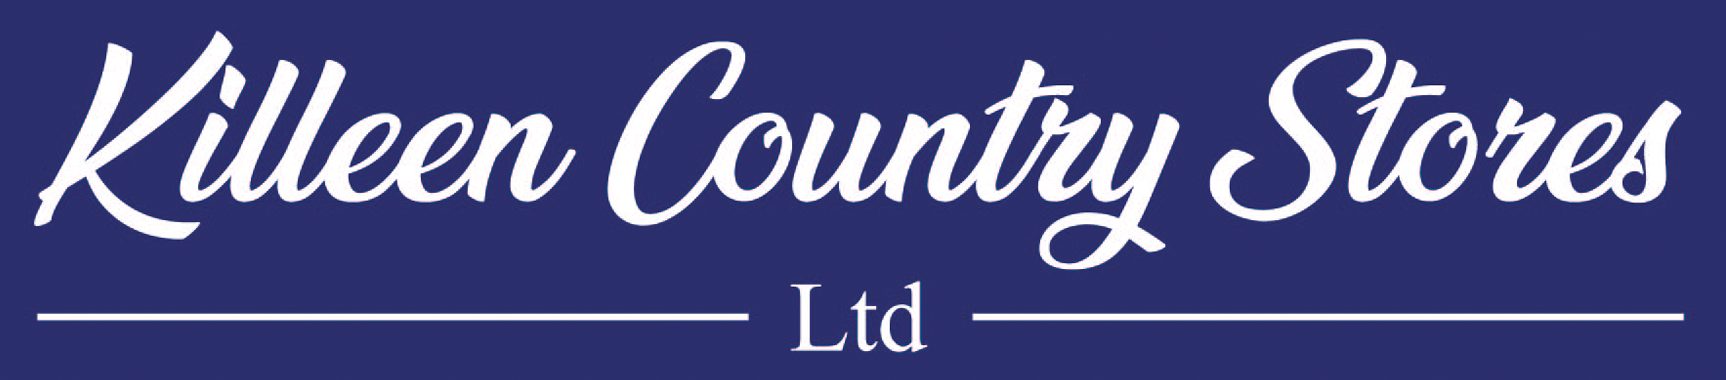 Killeen Country Stores Footer Logo